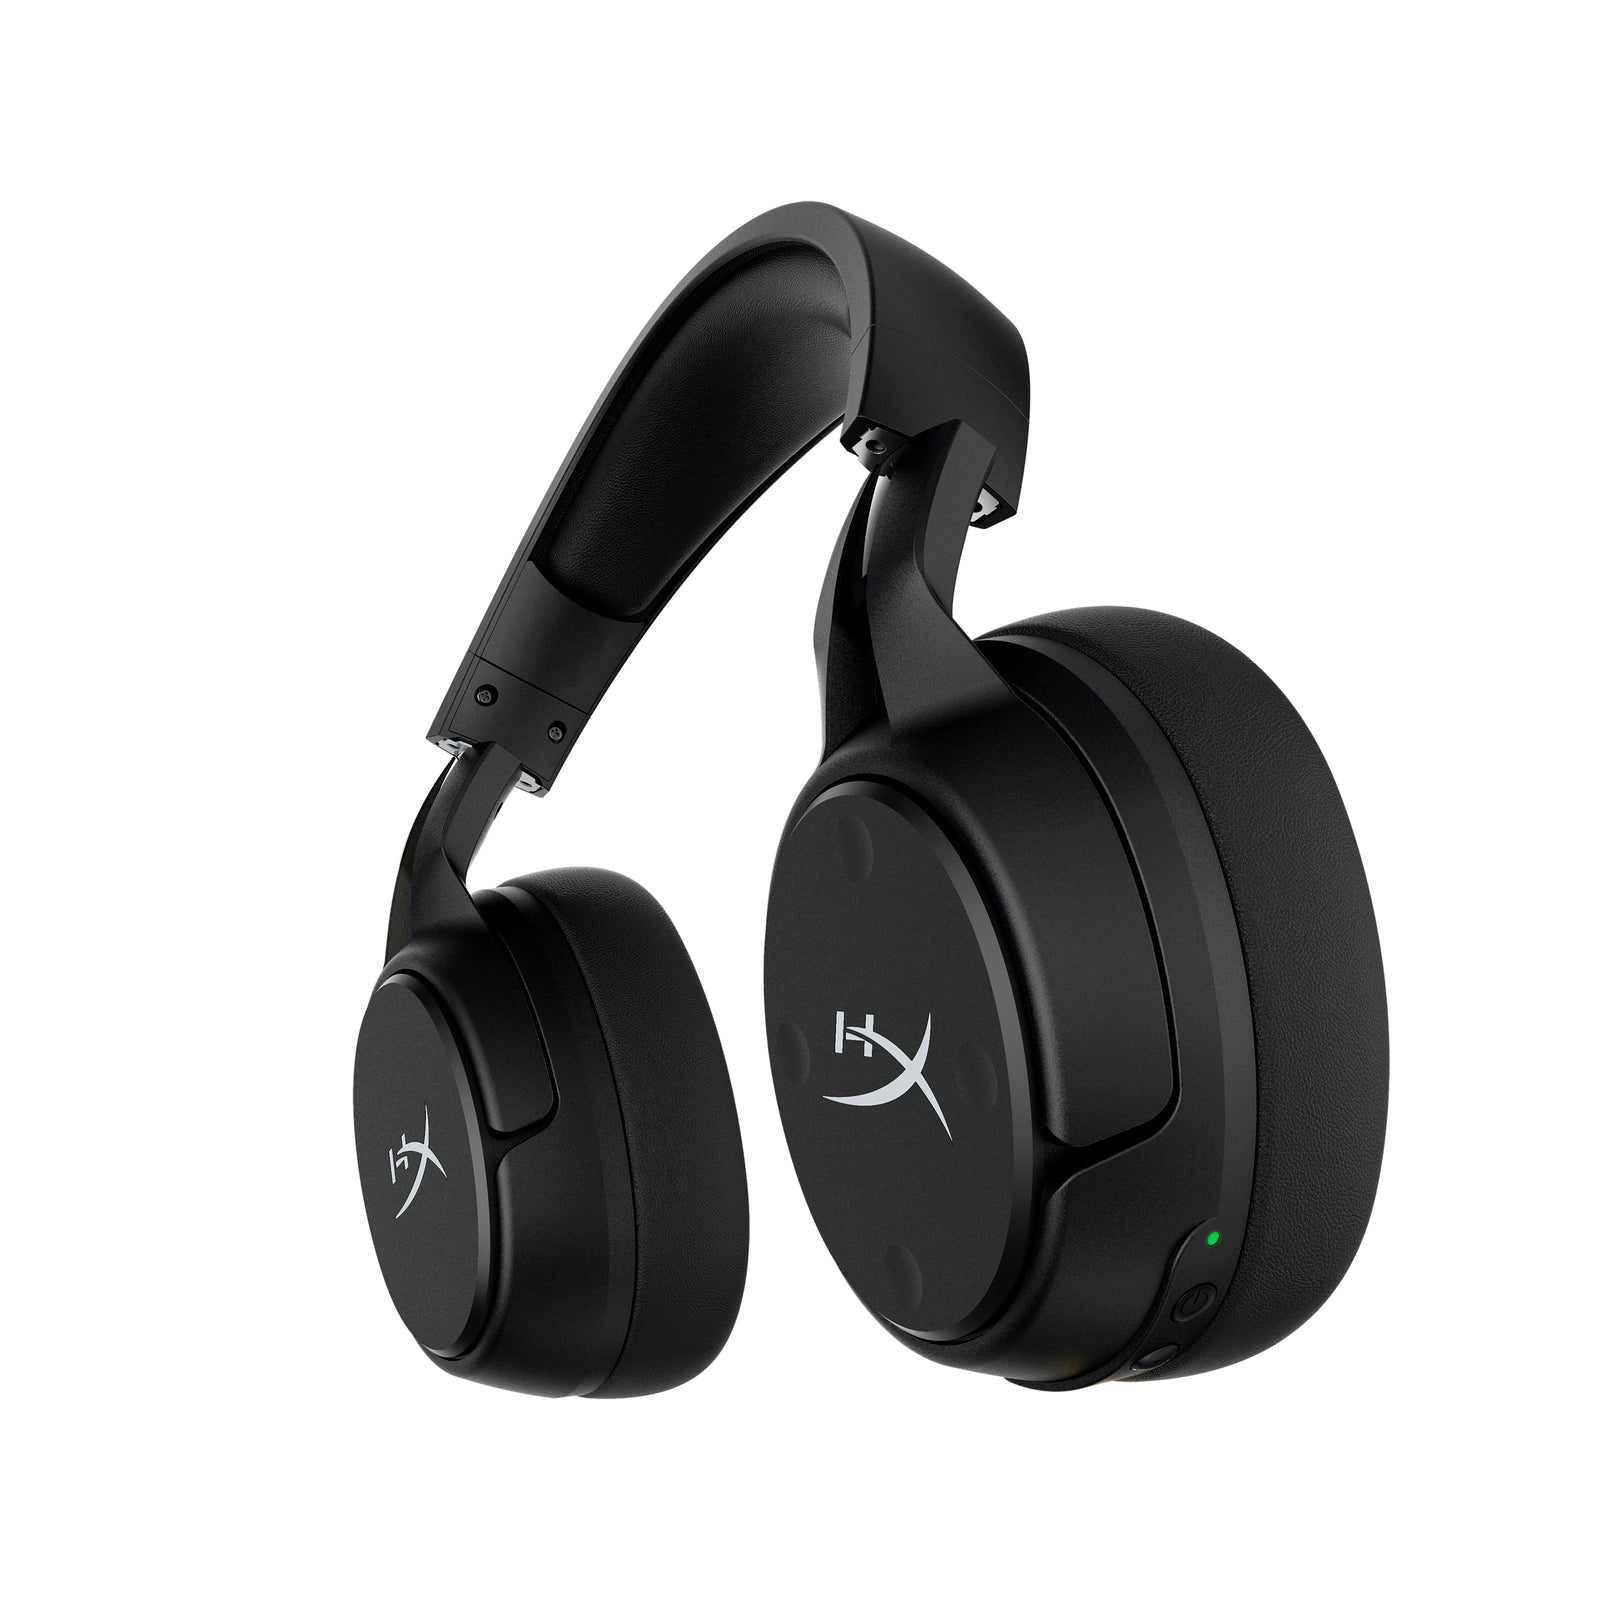 Cloud Flight S – Wireless USB Headset for PC and PS4 HyperX